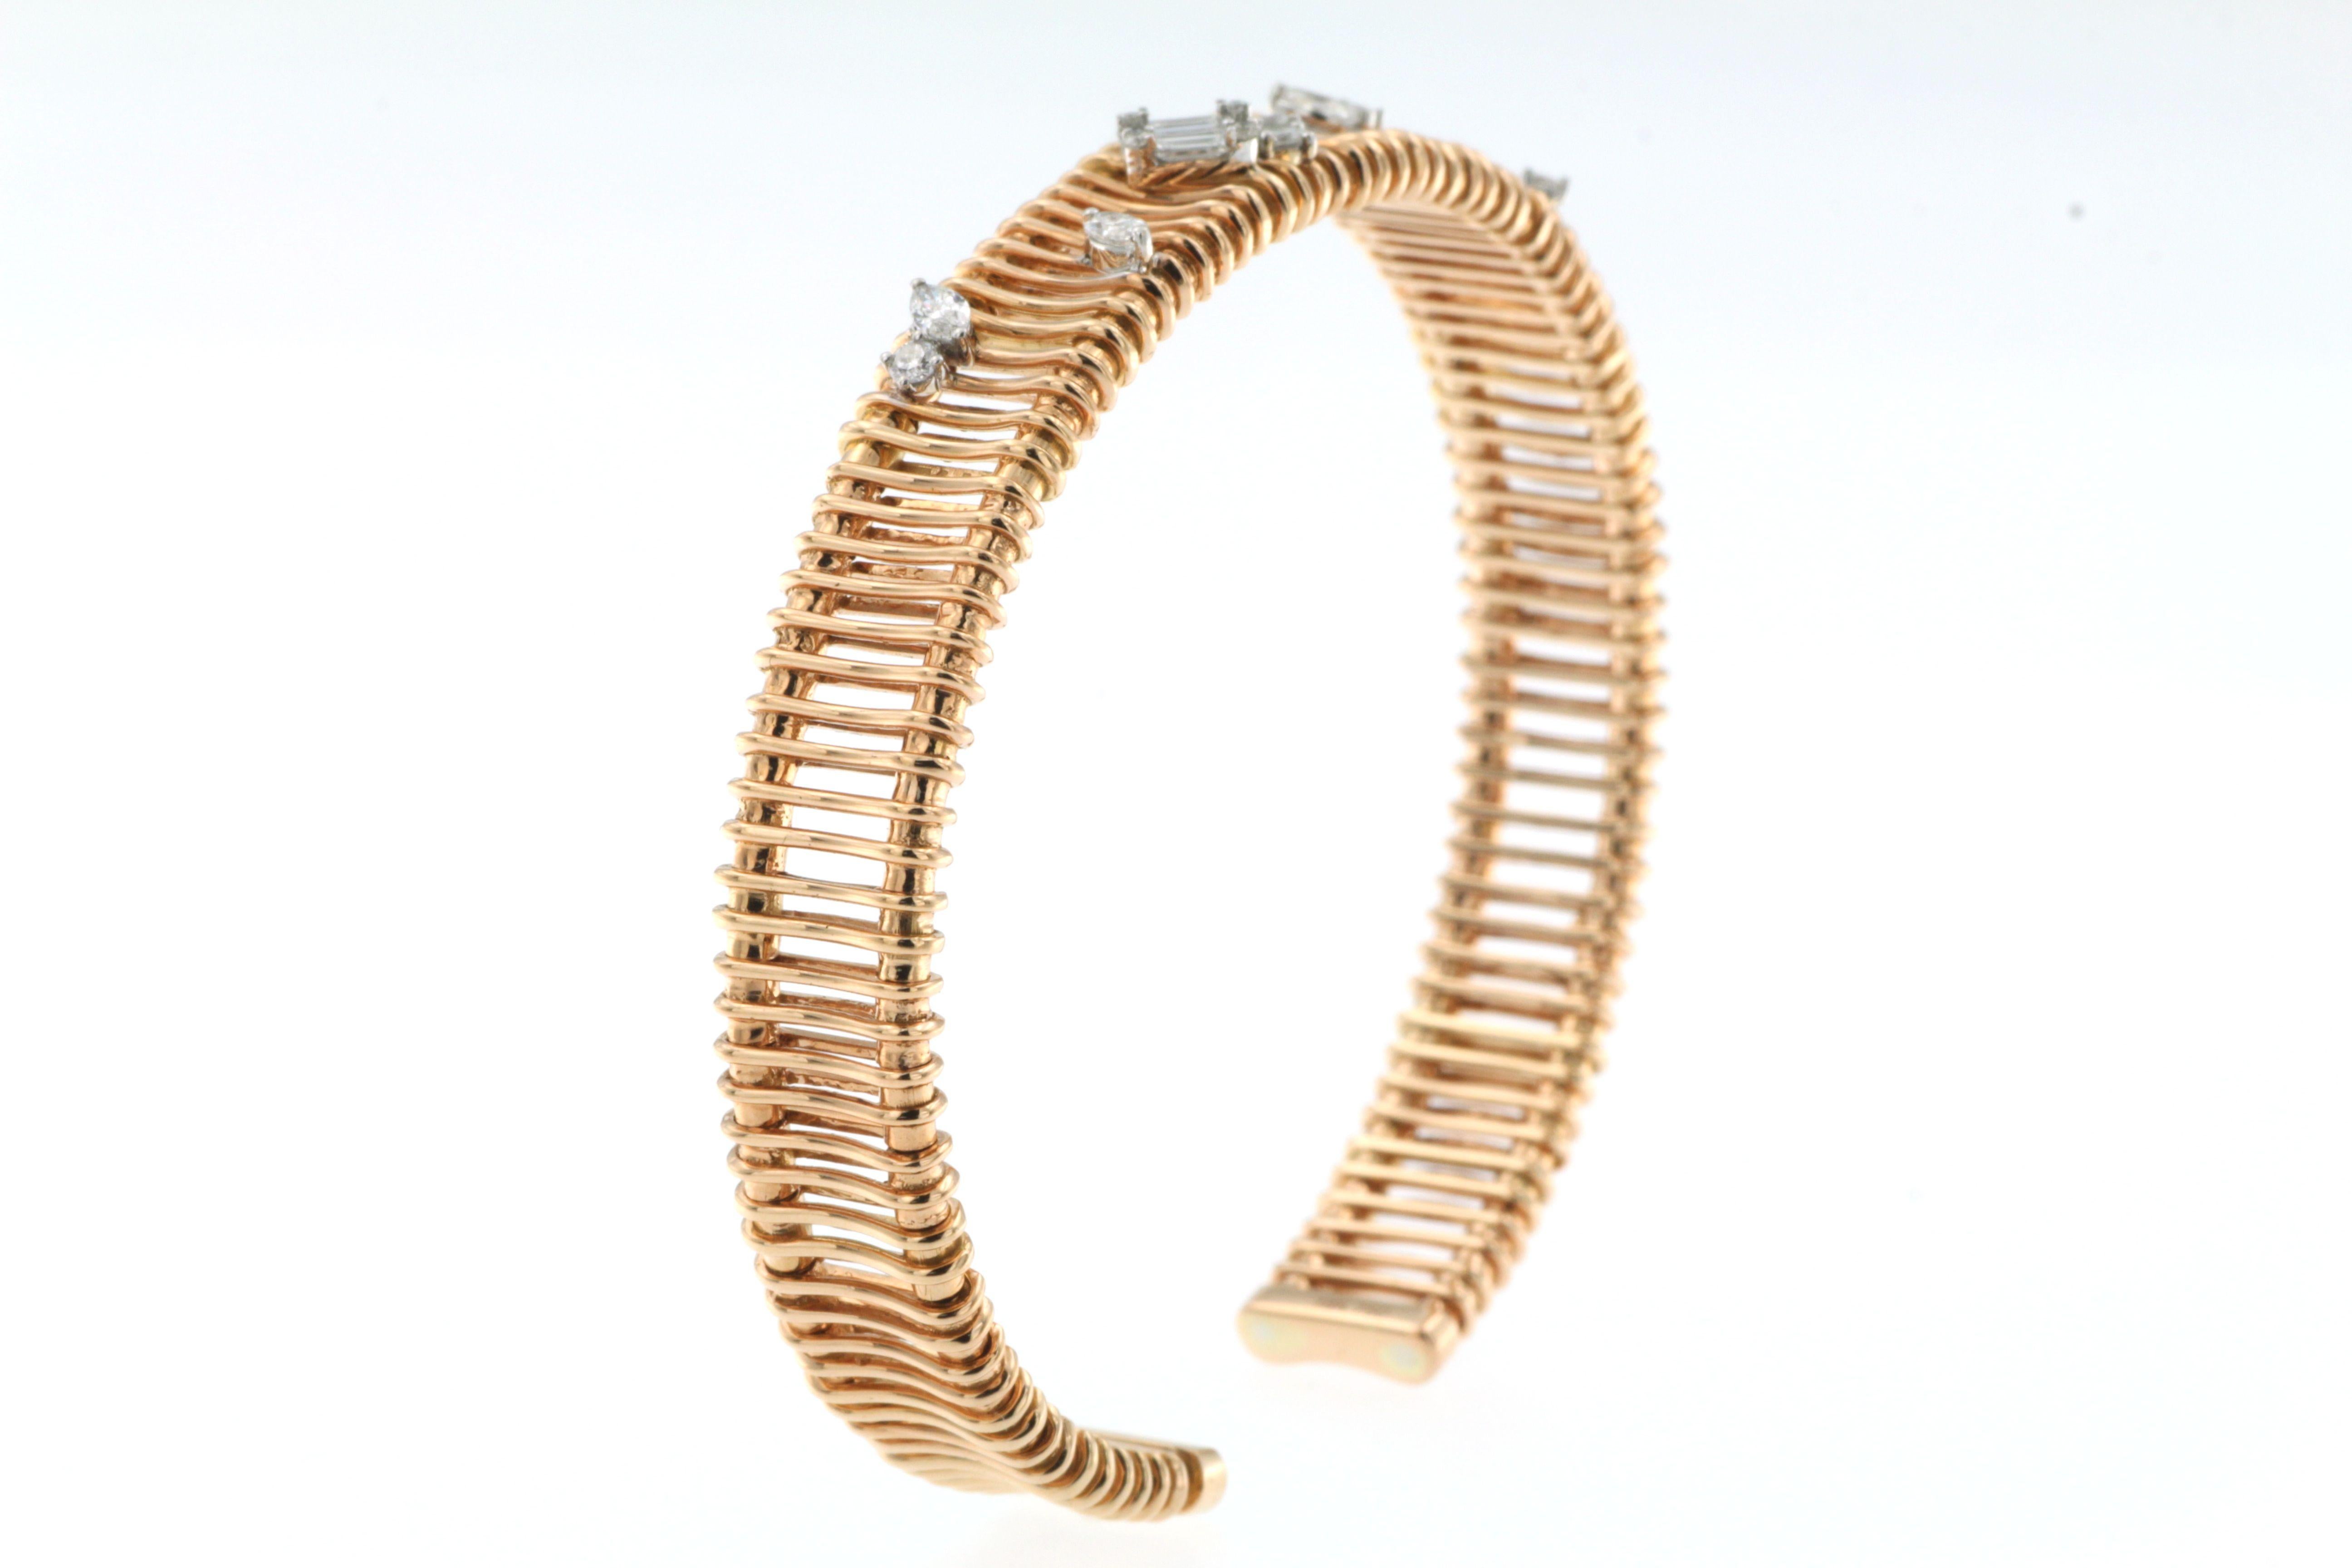 The bangle presented in the image is a beautiful piece of jewelry, crafted from 18 karat rose gold, and adorned with 0.47 carats of diamonds. The design features a flexible, slinky style, which gives it a modern and luxurious feel. The rose gold